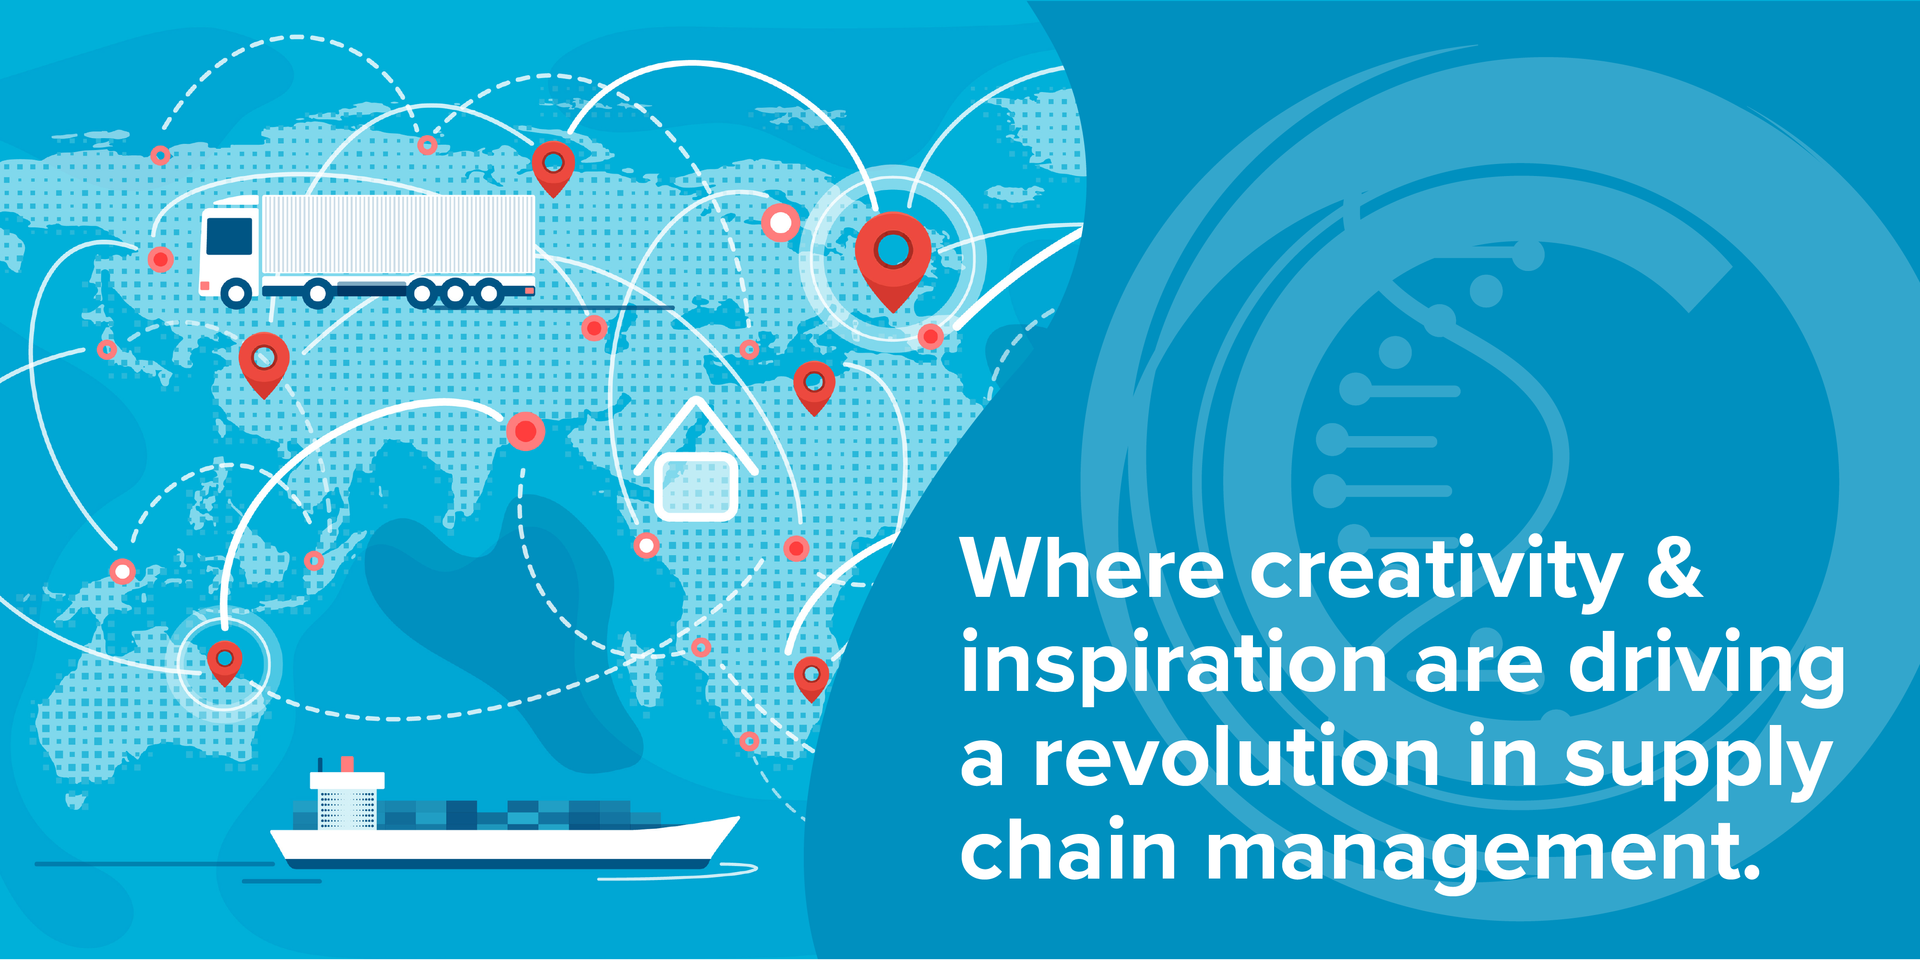 Where creativity & inspiration are driving a revolution in supply chain management.